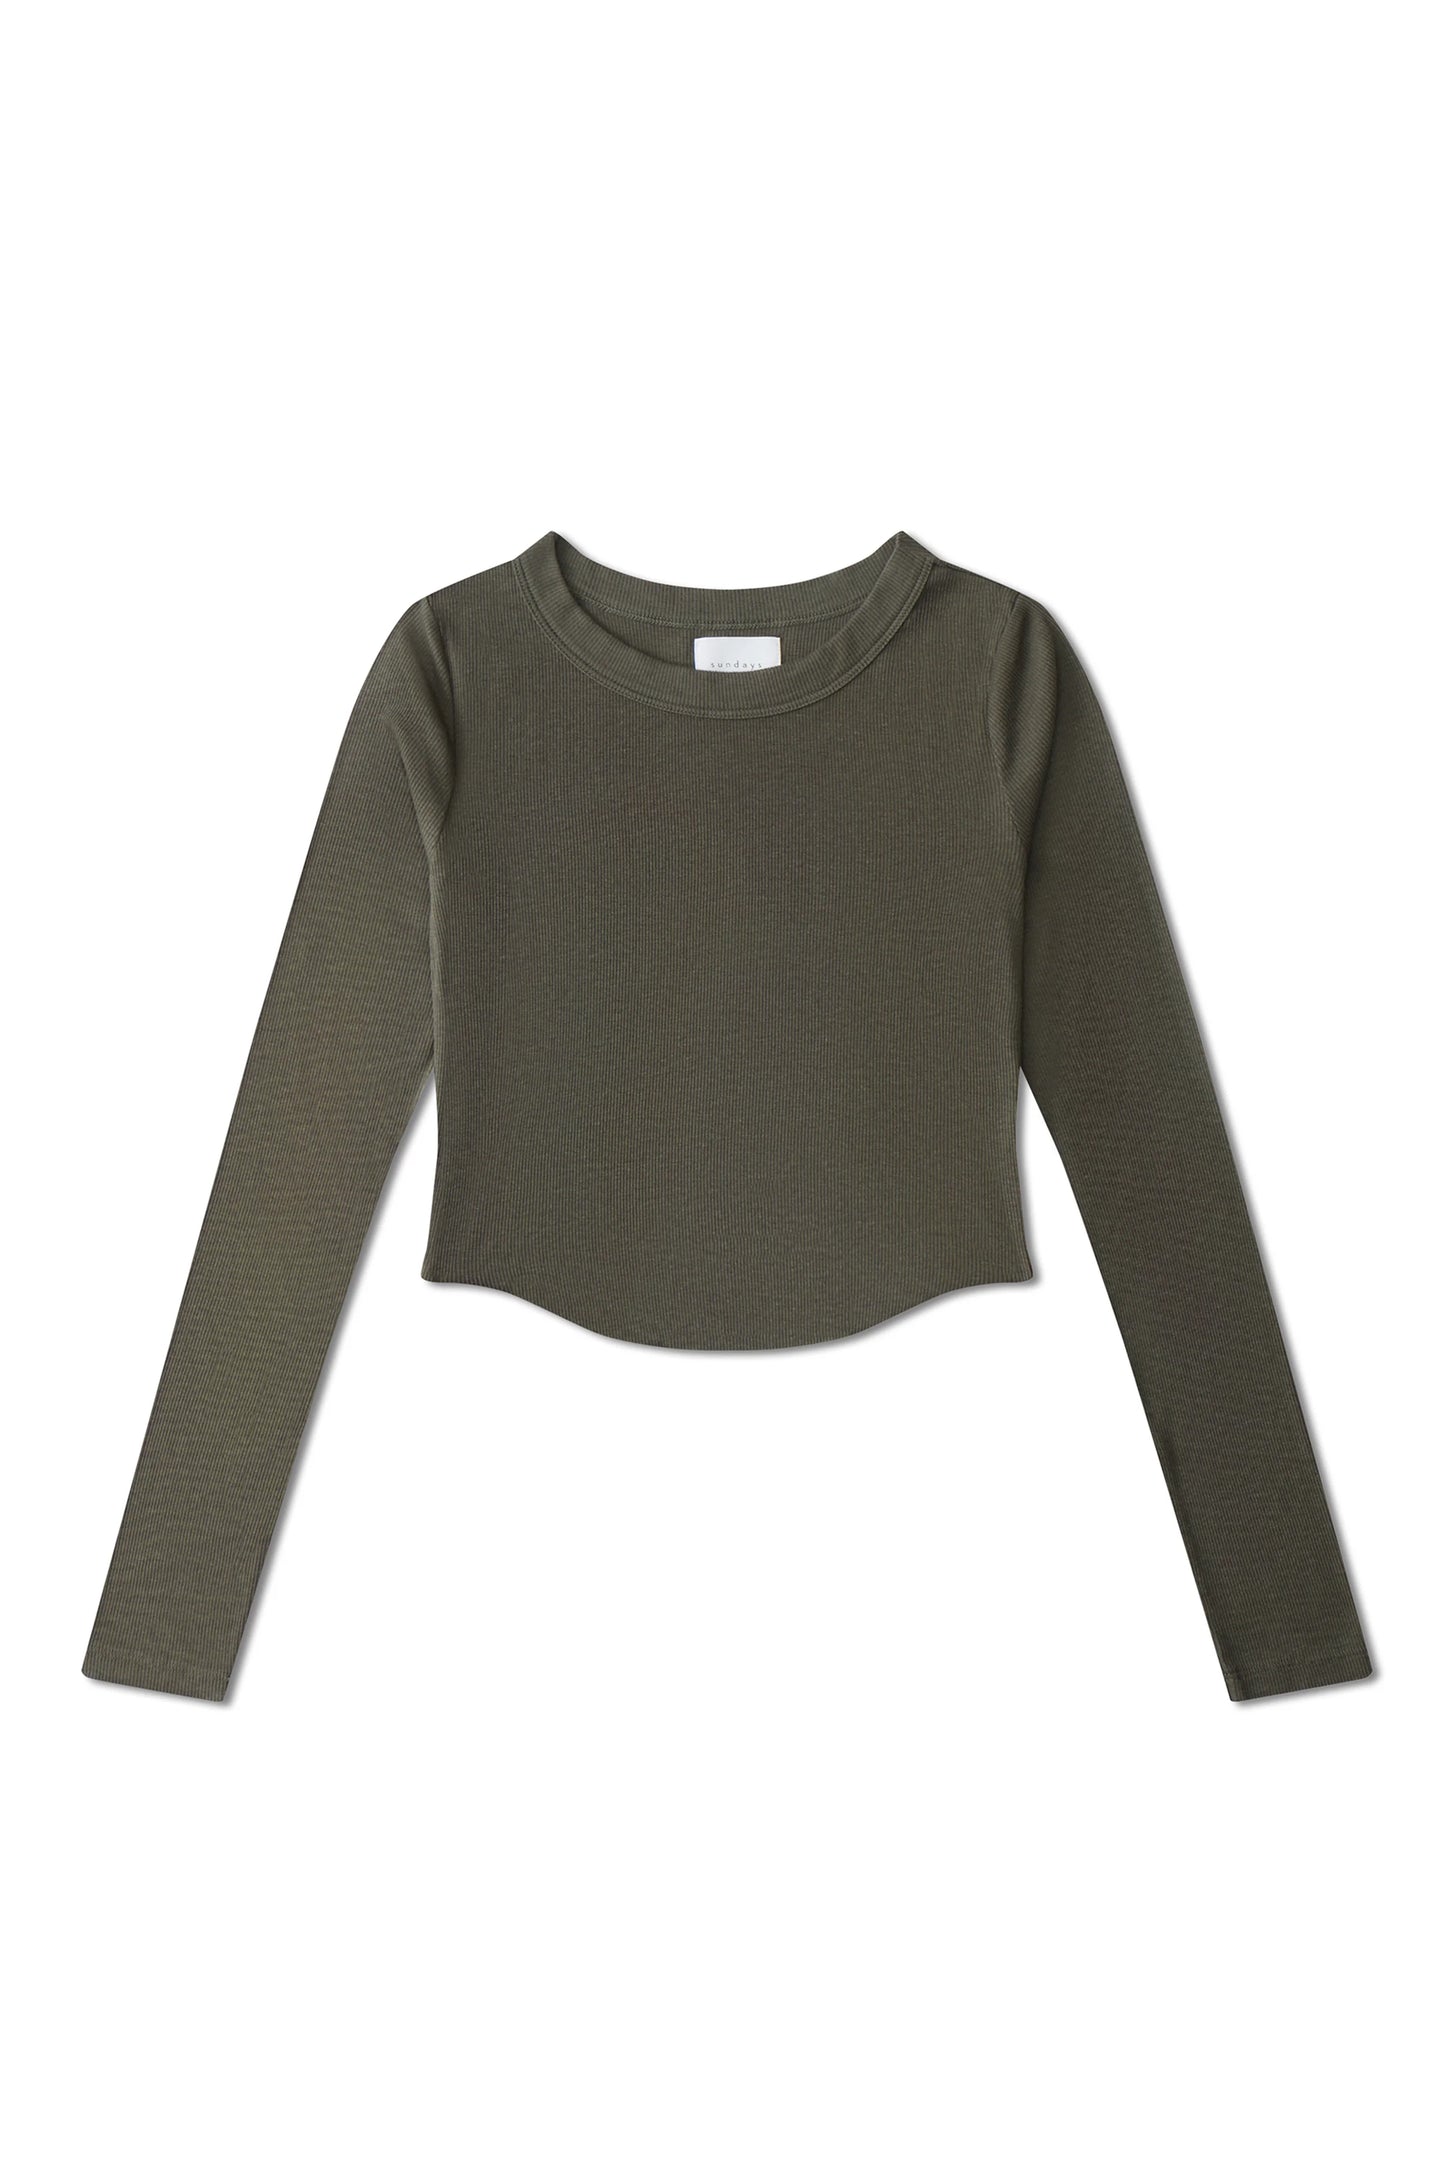 Cecil Top- Army Green